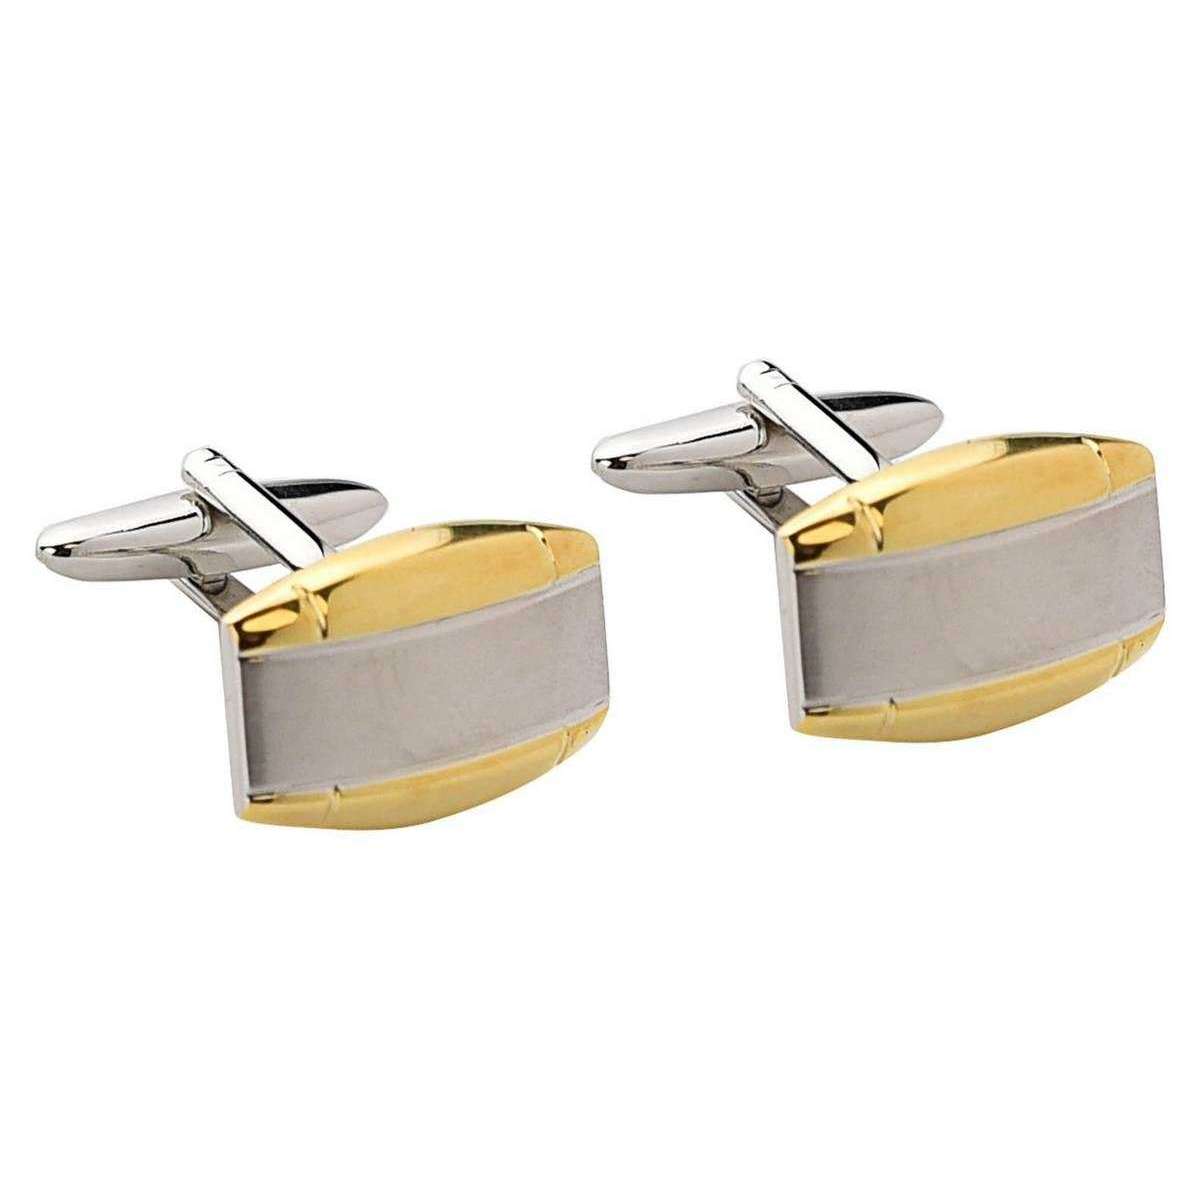 Harvey Makin Brushed and Shiny Cufflinks - Gold/Silver